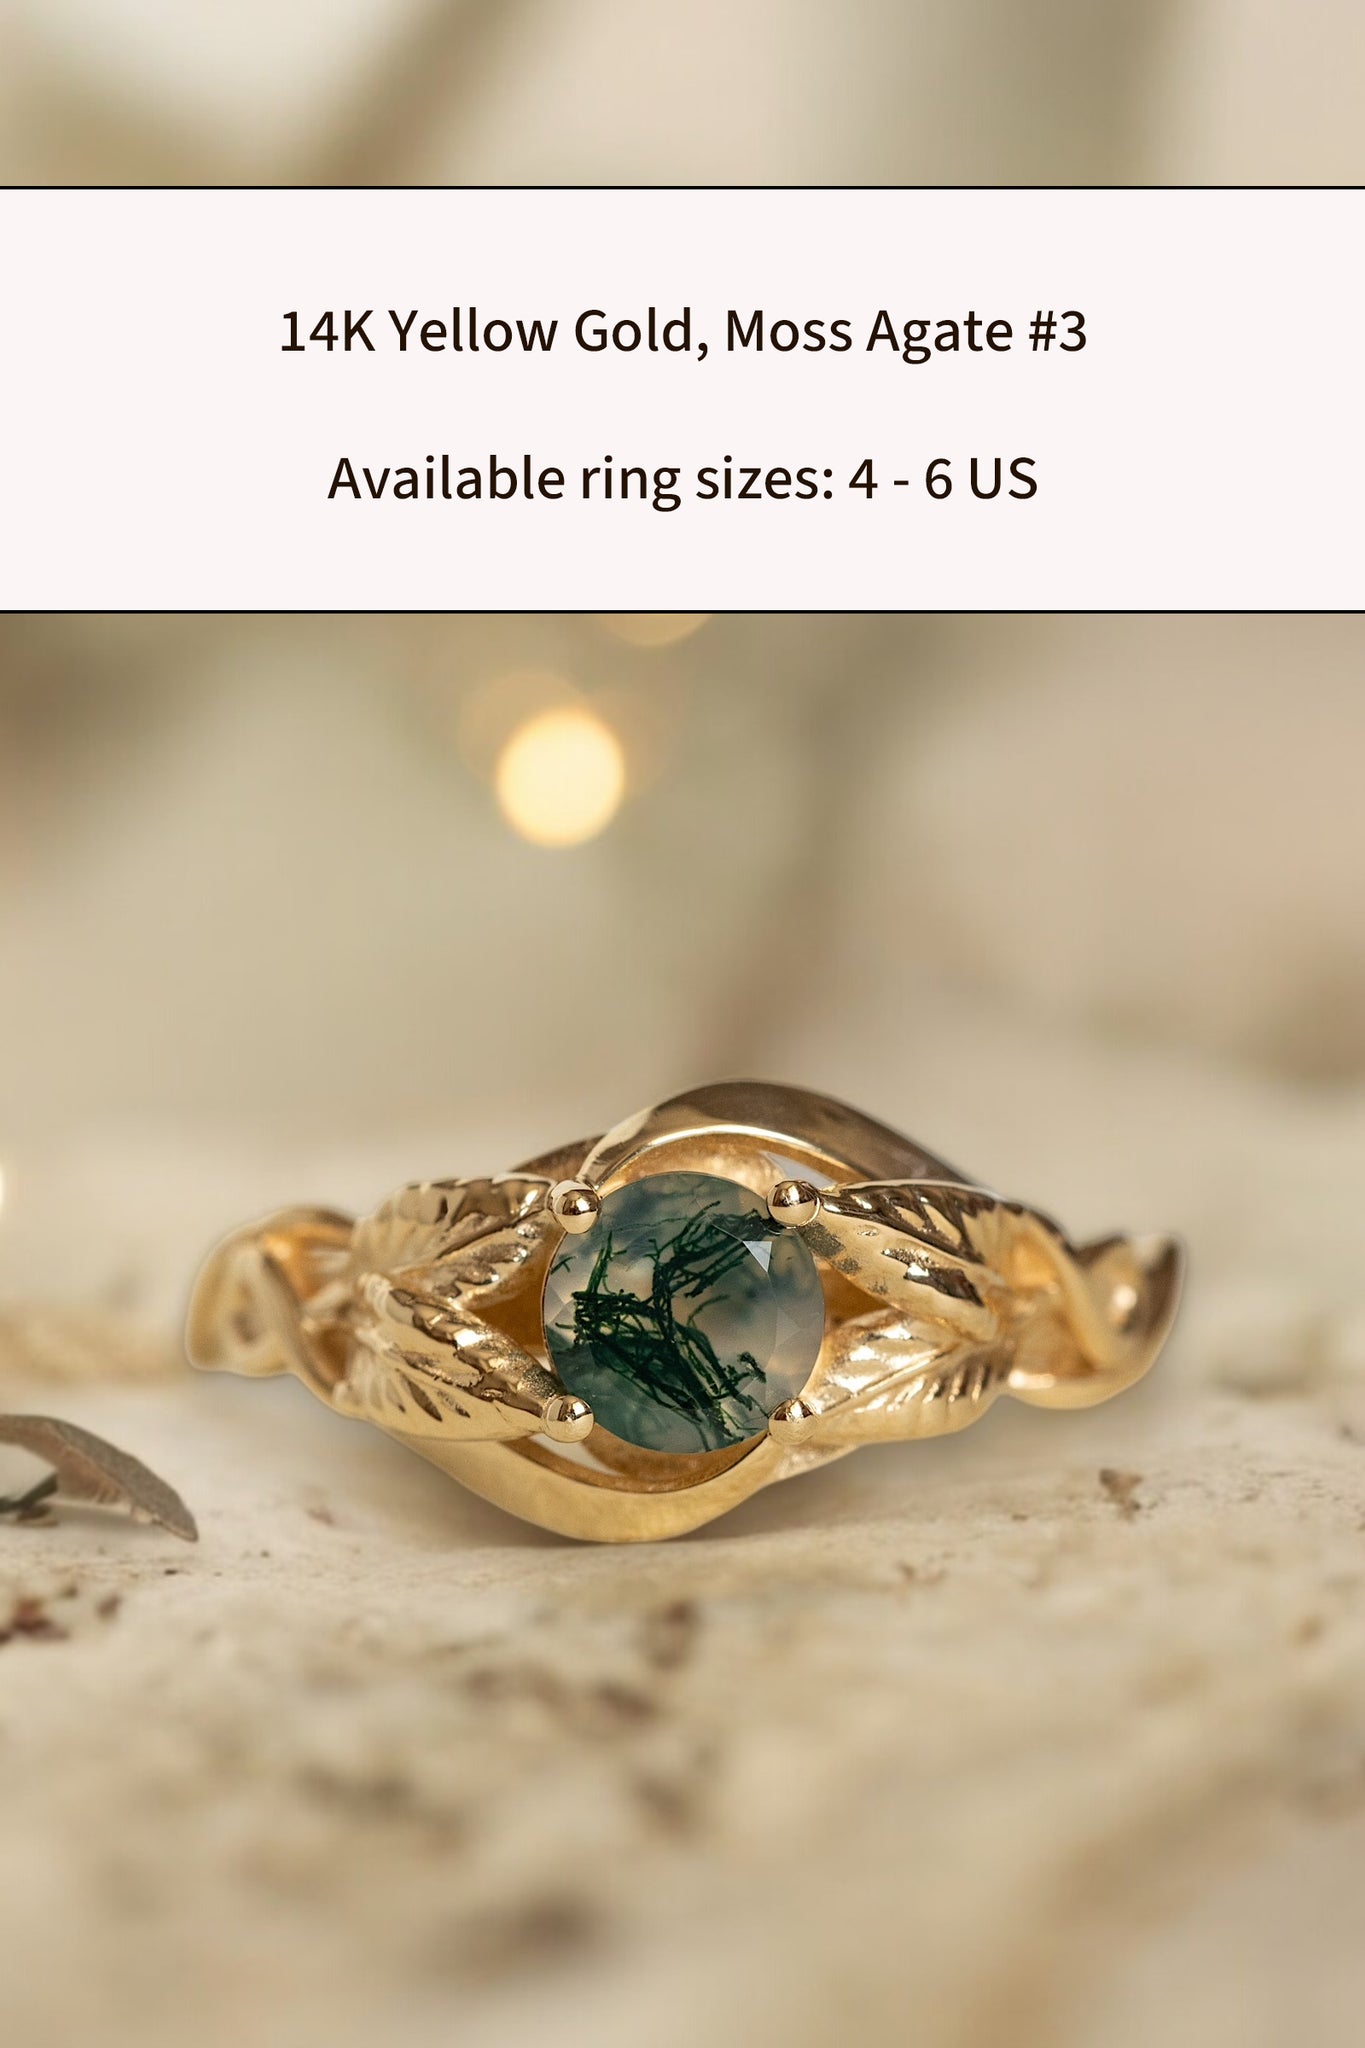 READY TO SHIP: Azalea ring in 14K yellow gold, natural moss agate round cut 5 mm, AVAILABLE RING SIZES: 4-9 US